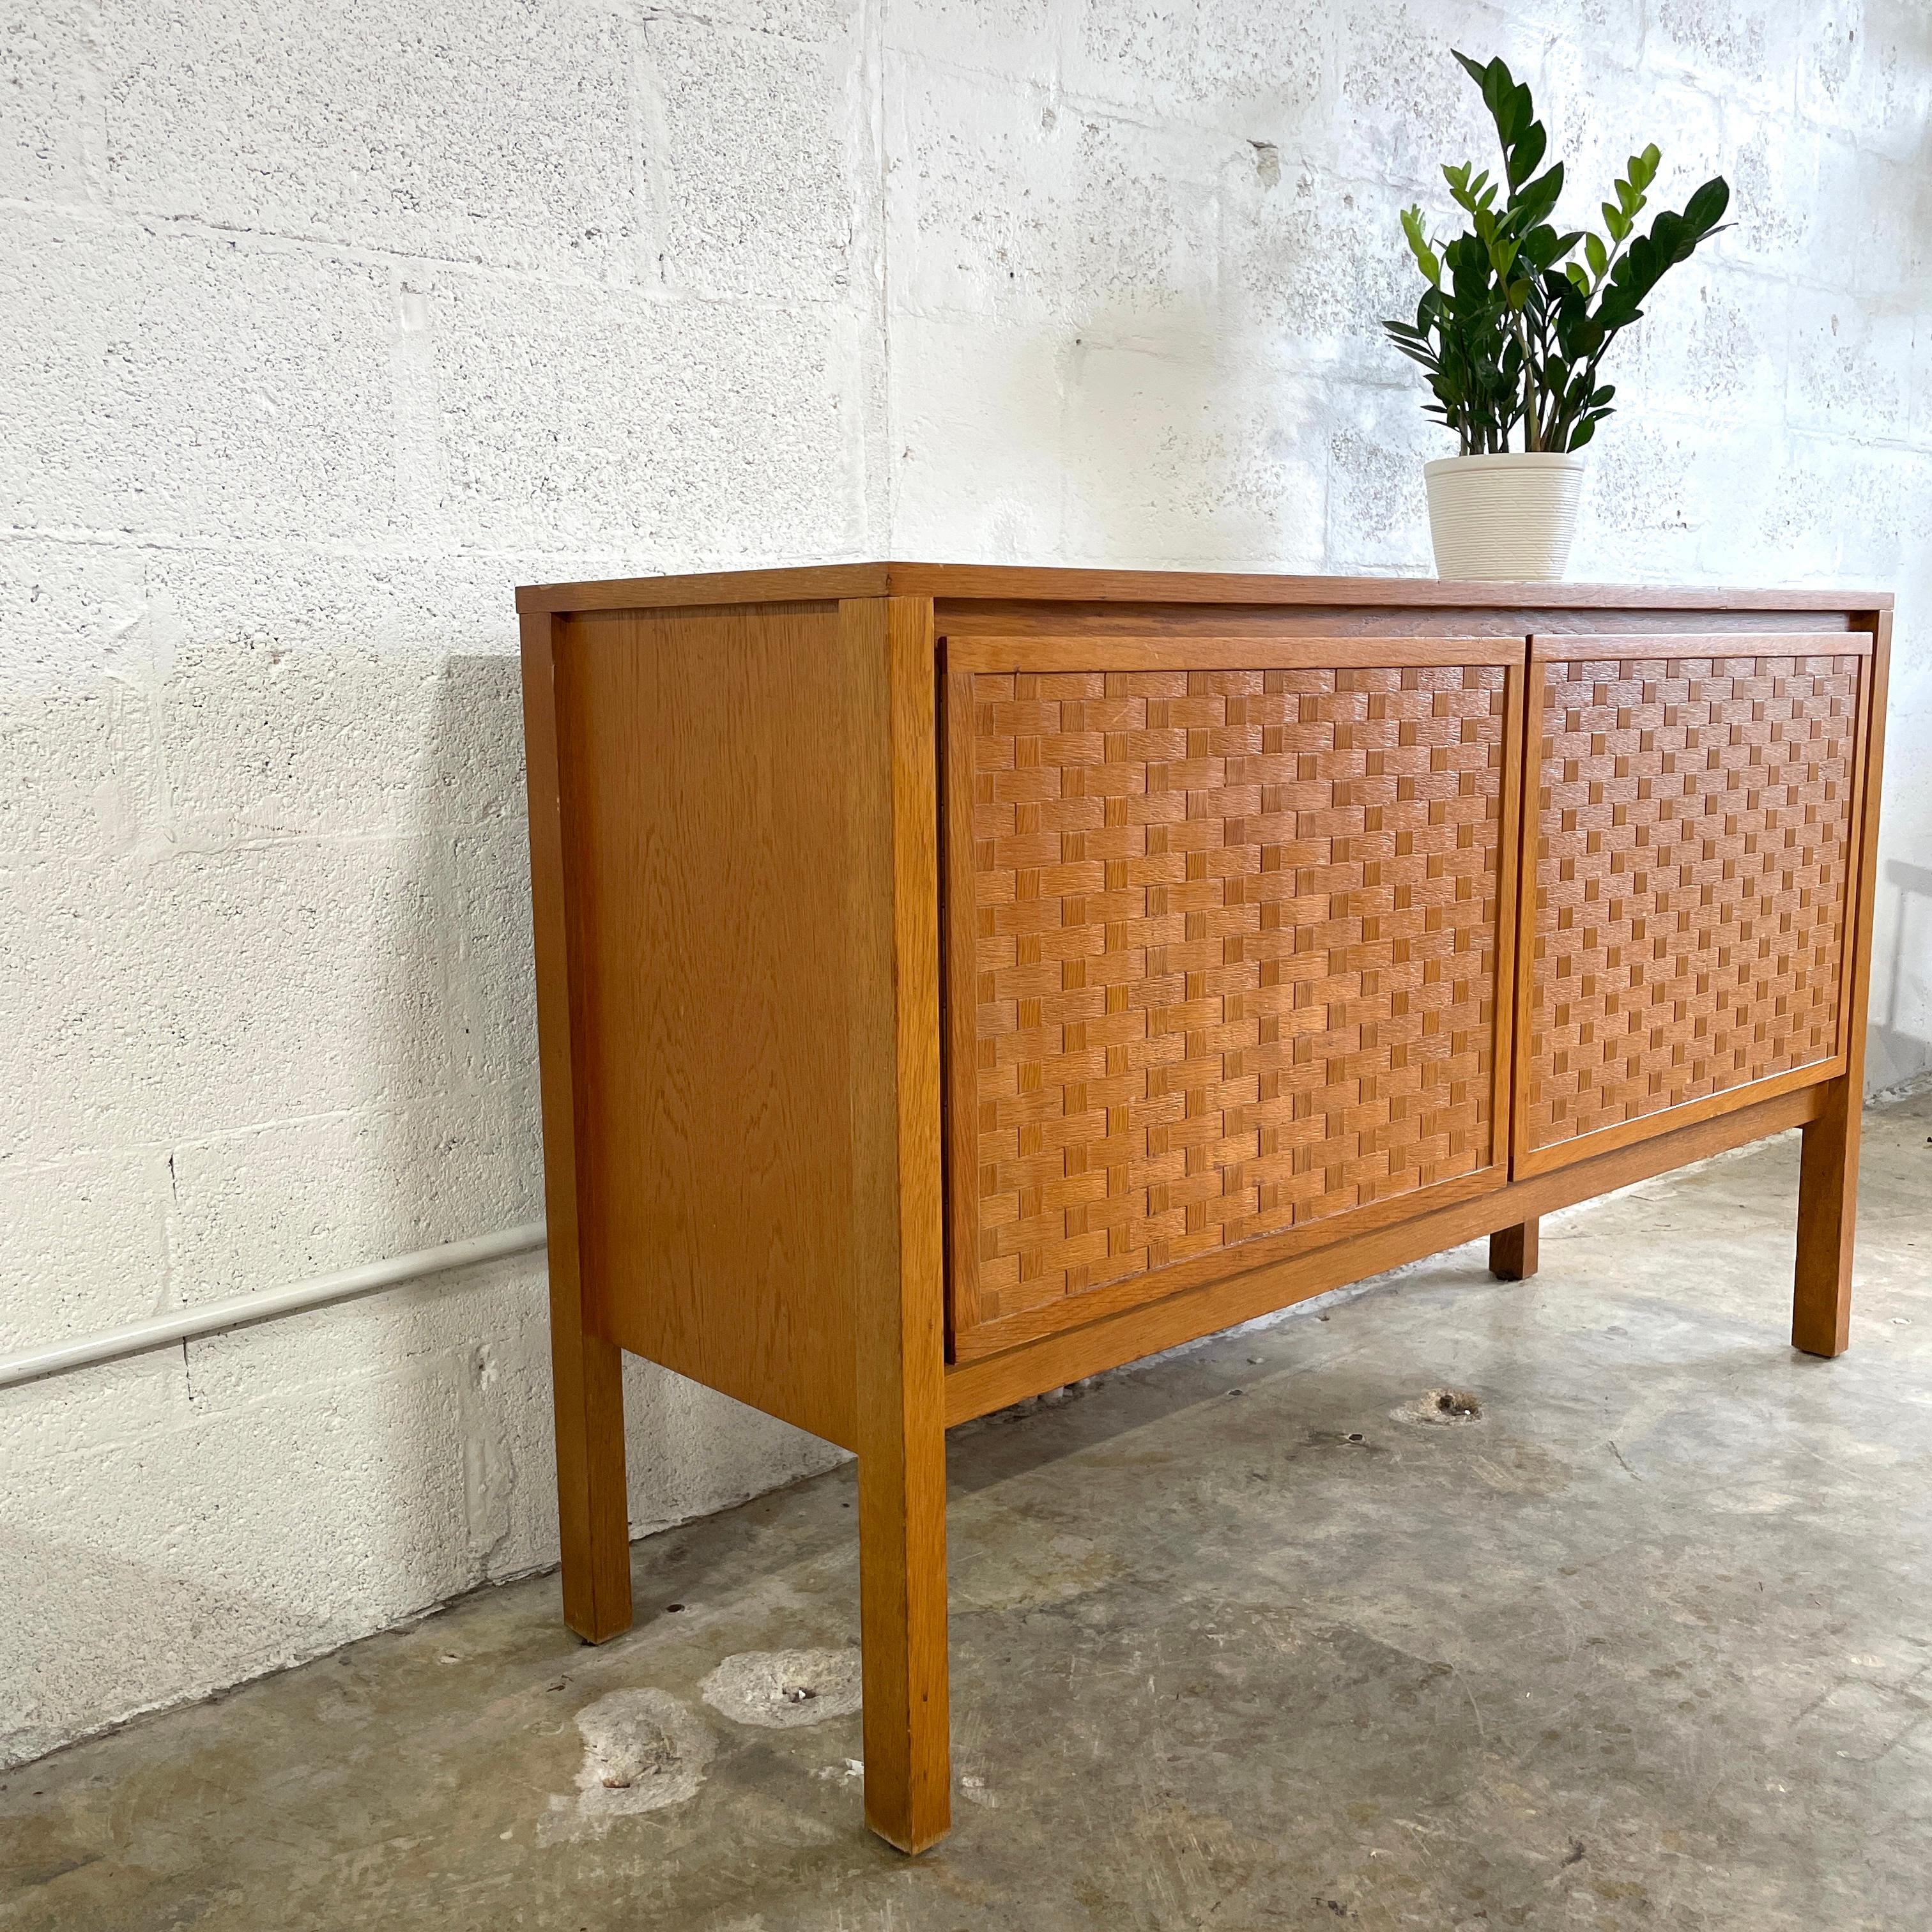 Rare Vintage Mid Century Sideboard by Leo Bub for Bub Wertmobel 1960s. Woven fronts. Made in Germany. 50.5w 16d 31h